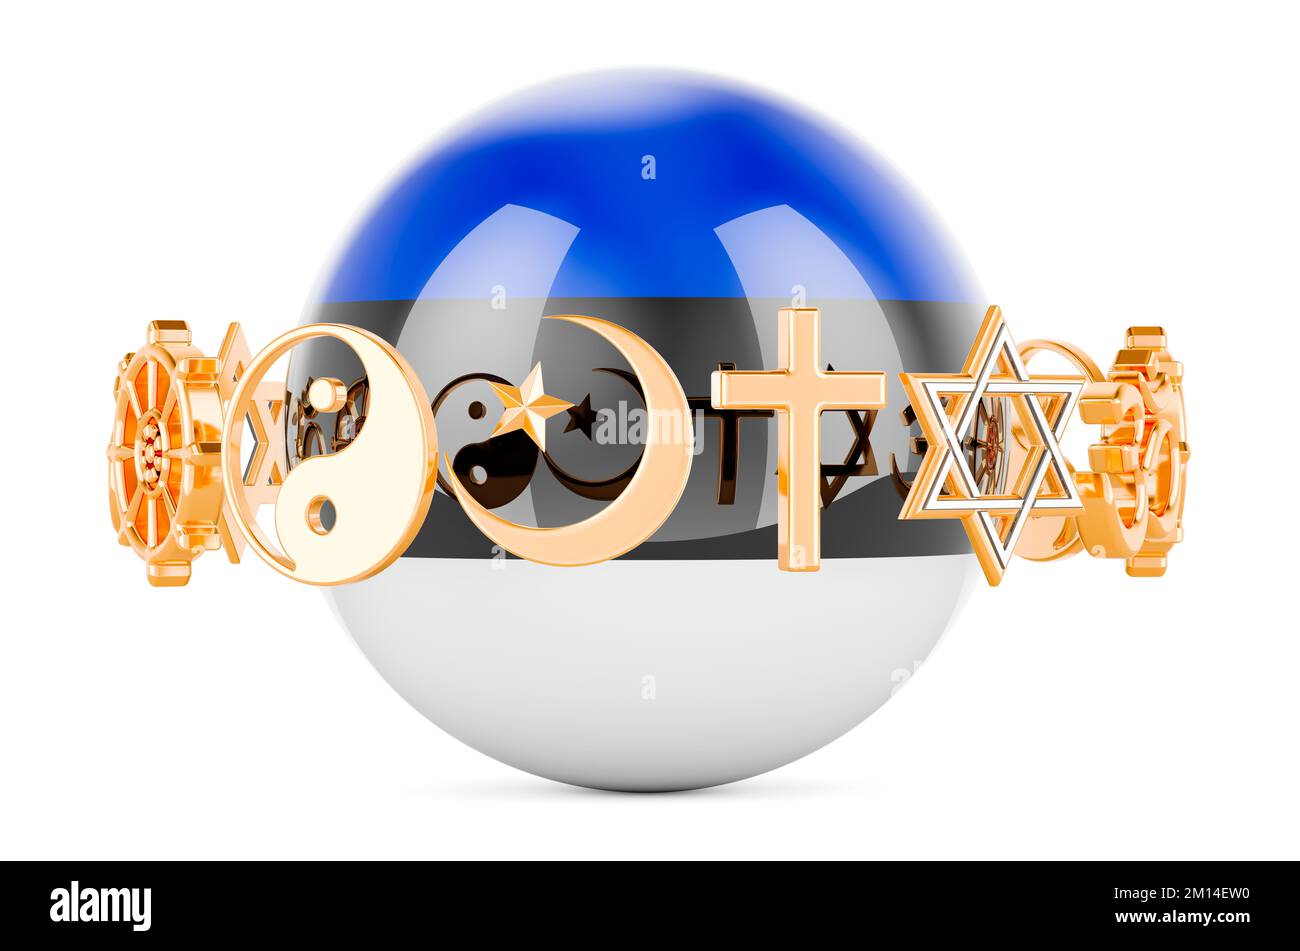 Estonian flag painted on sphere with religions symbols around, 3D rendering isolated on white background Stock Photo